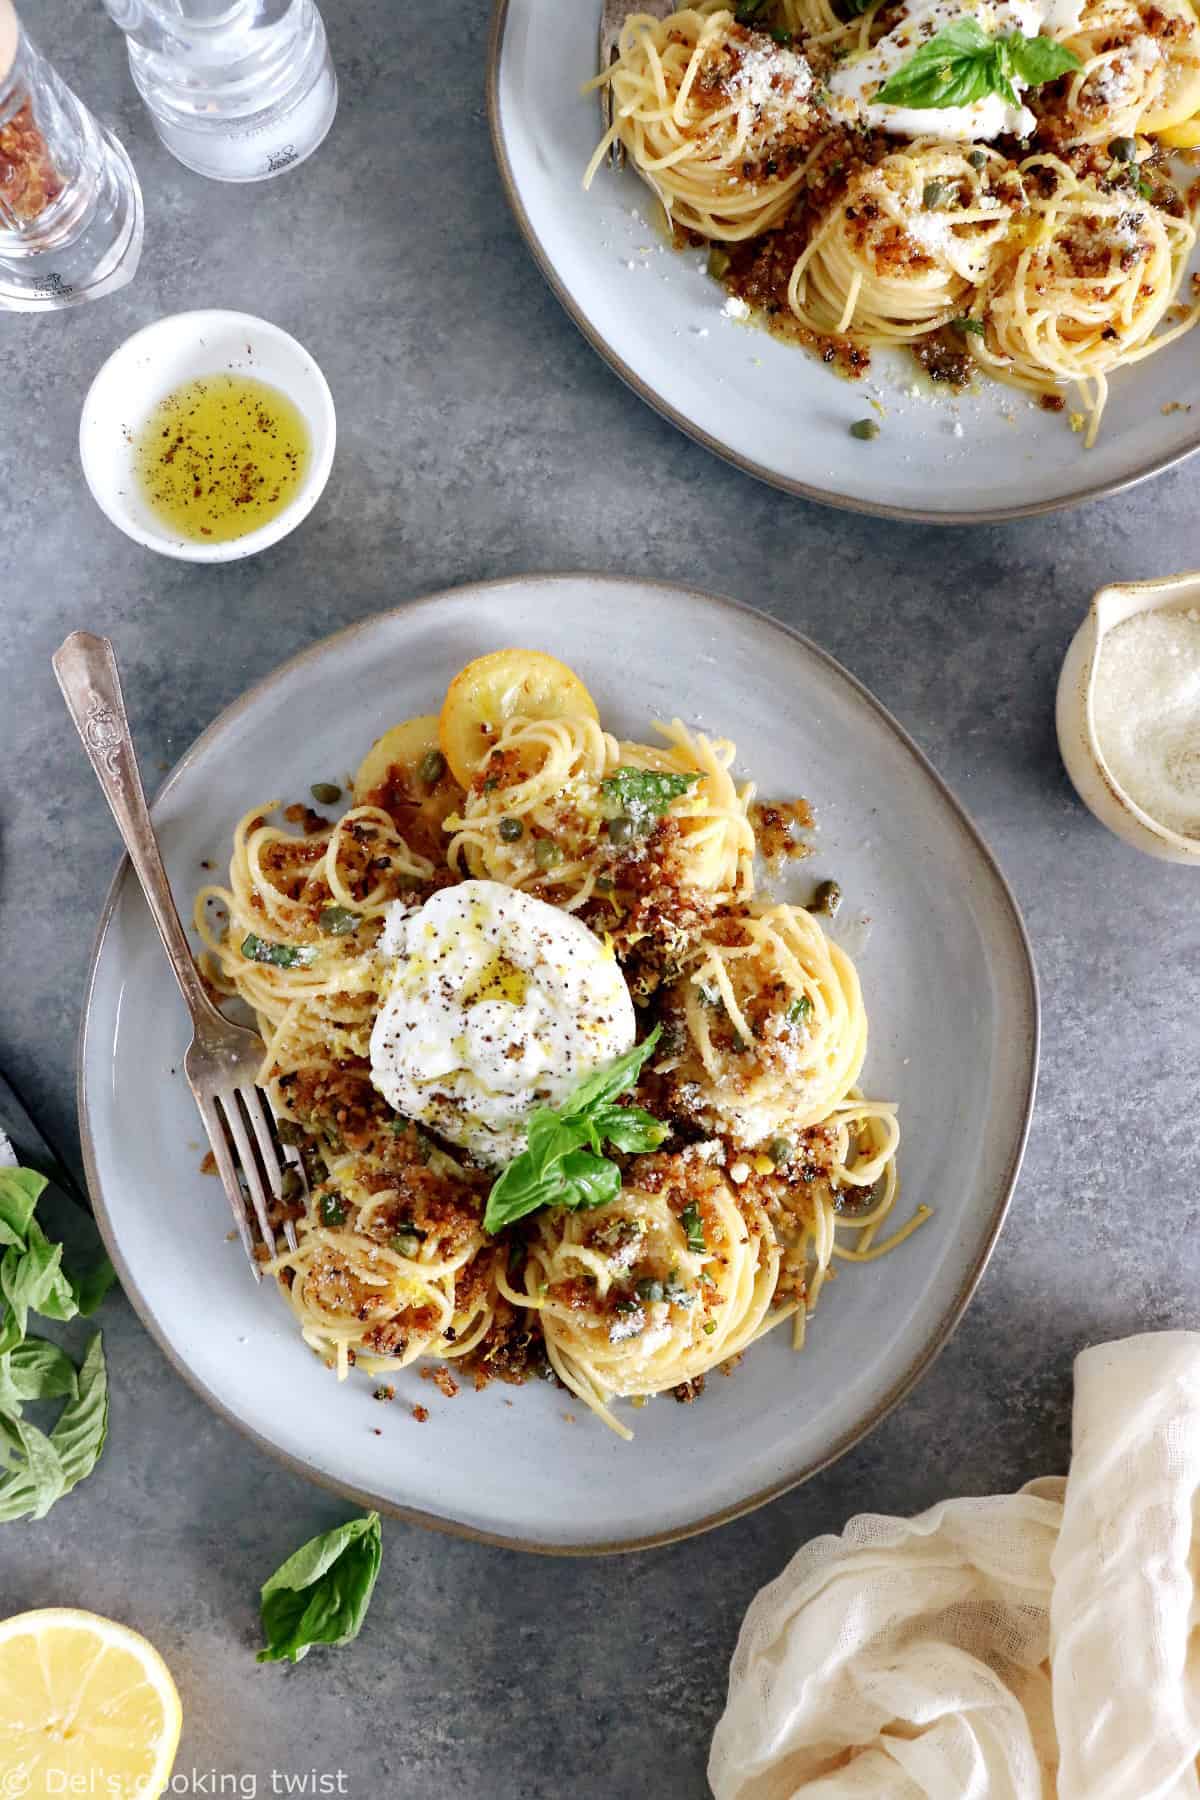 Lemon Butter Pasta with Burrata Cheese - Del's cooking twist